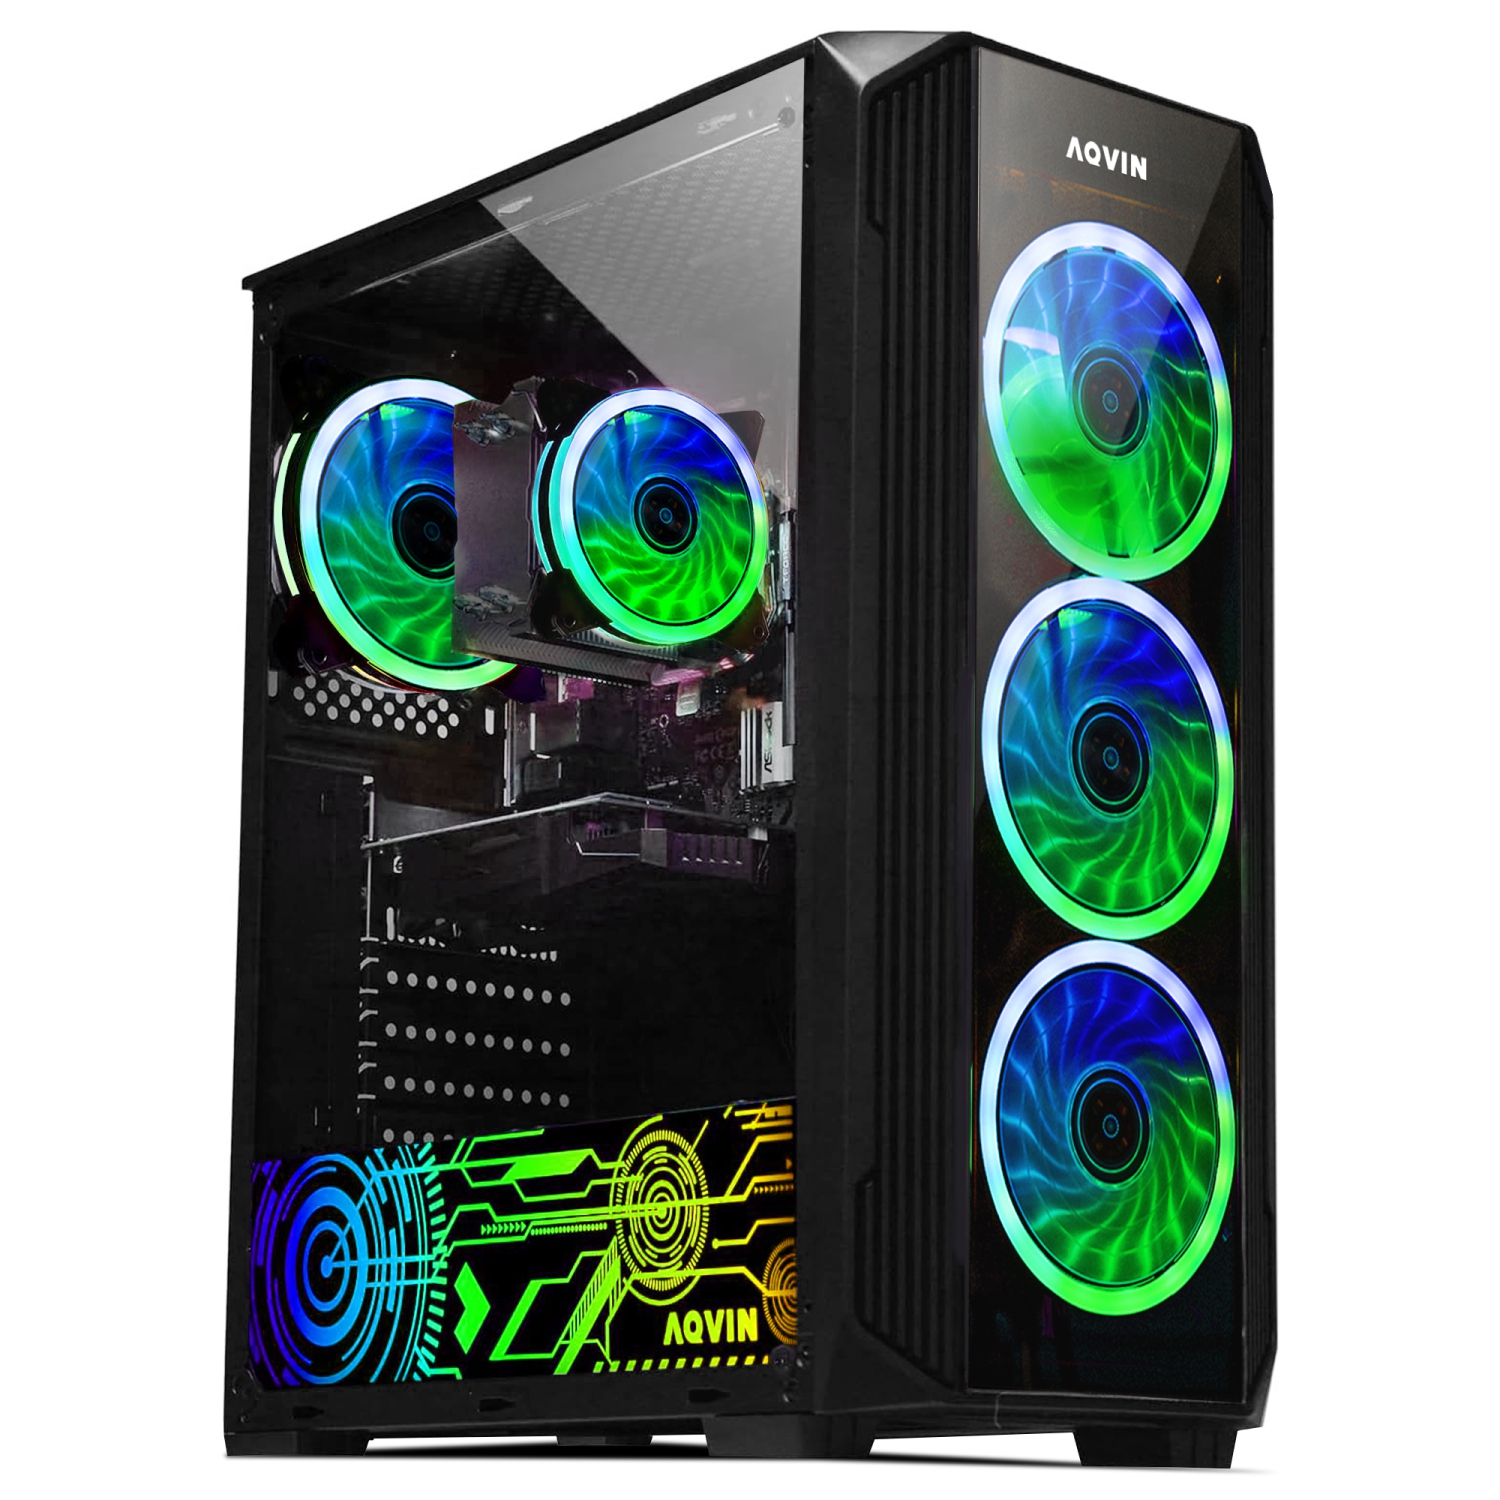 AQVIN ZForce Tower Prebuilt Gaming PC - Intel Core i7 up to  4.6Ghz 32GB DDR4 RAM  1TB SSD GeForce RTX 3060 12GB HDMI, RGB Keyboard, Mouse Windows 11 Pro WIFI - Only at BestBuy